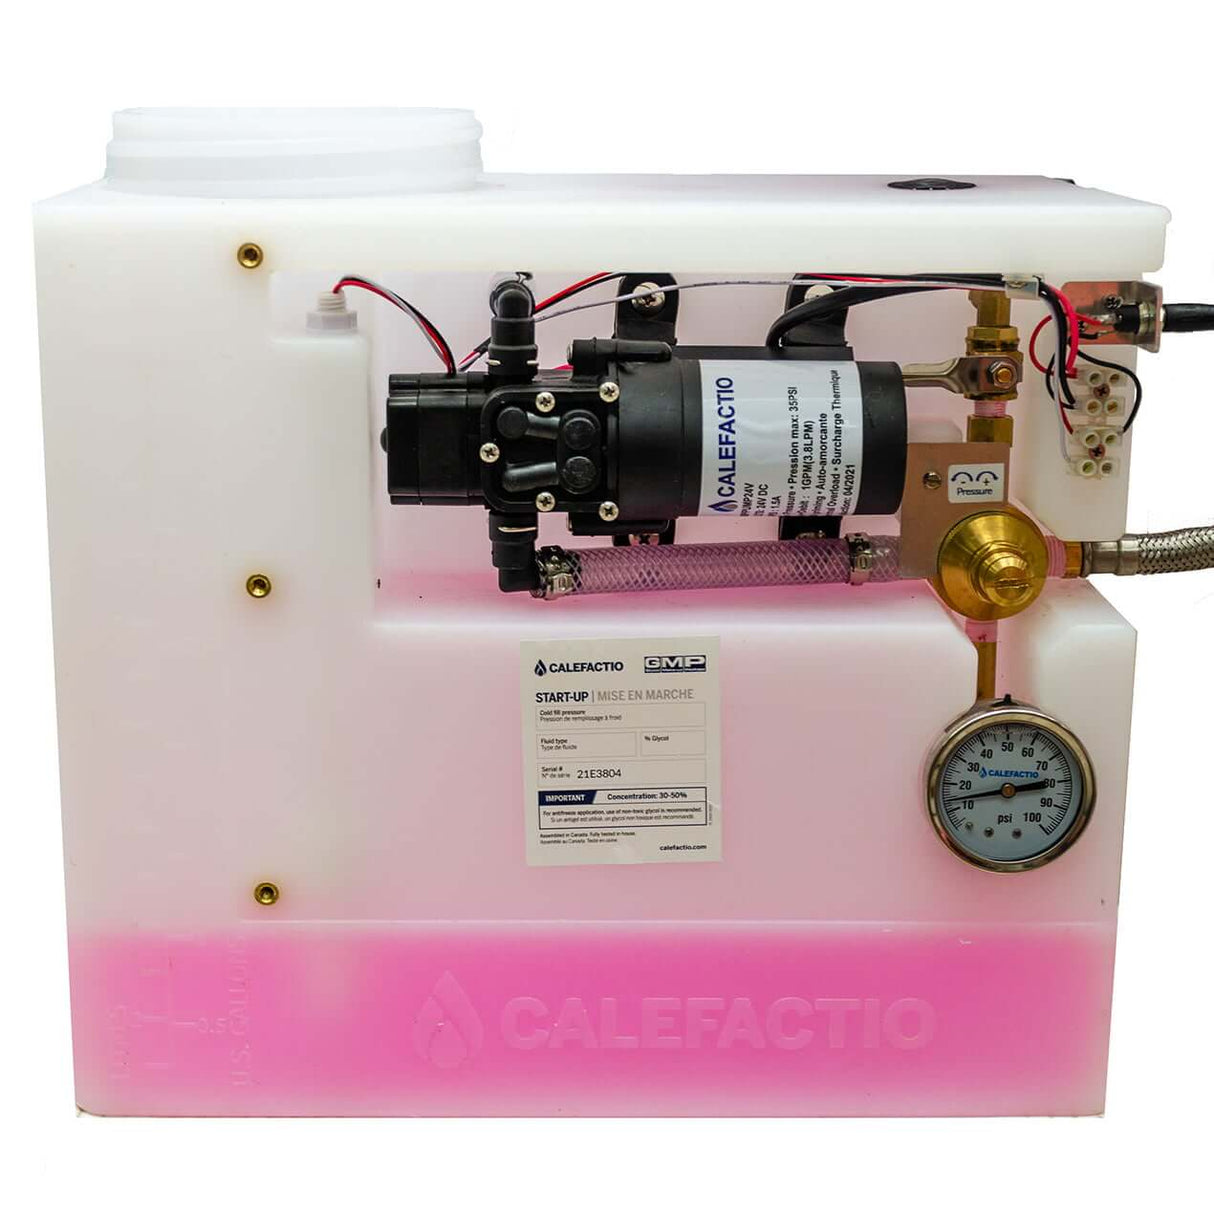 Calefactio GMP4 glycol make-up filling pump system for hydronic radiant floor heating system - front inside